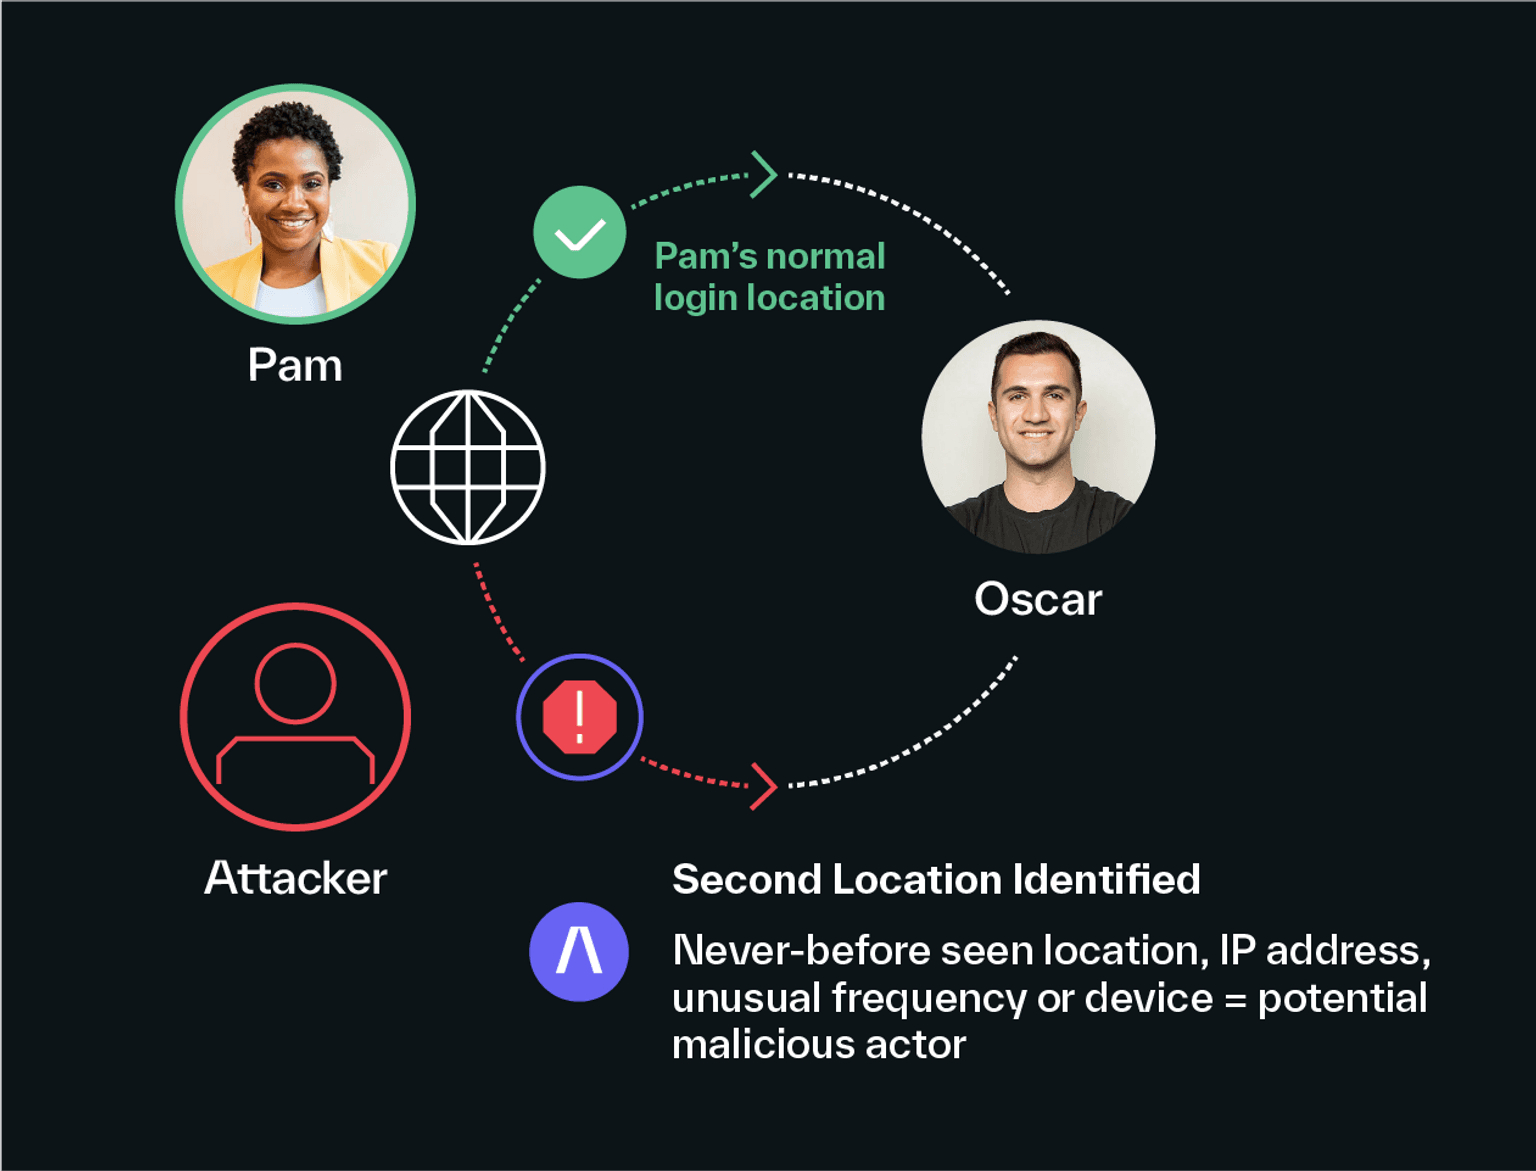 detecting a potential account takeover based on location